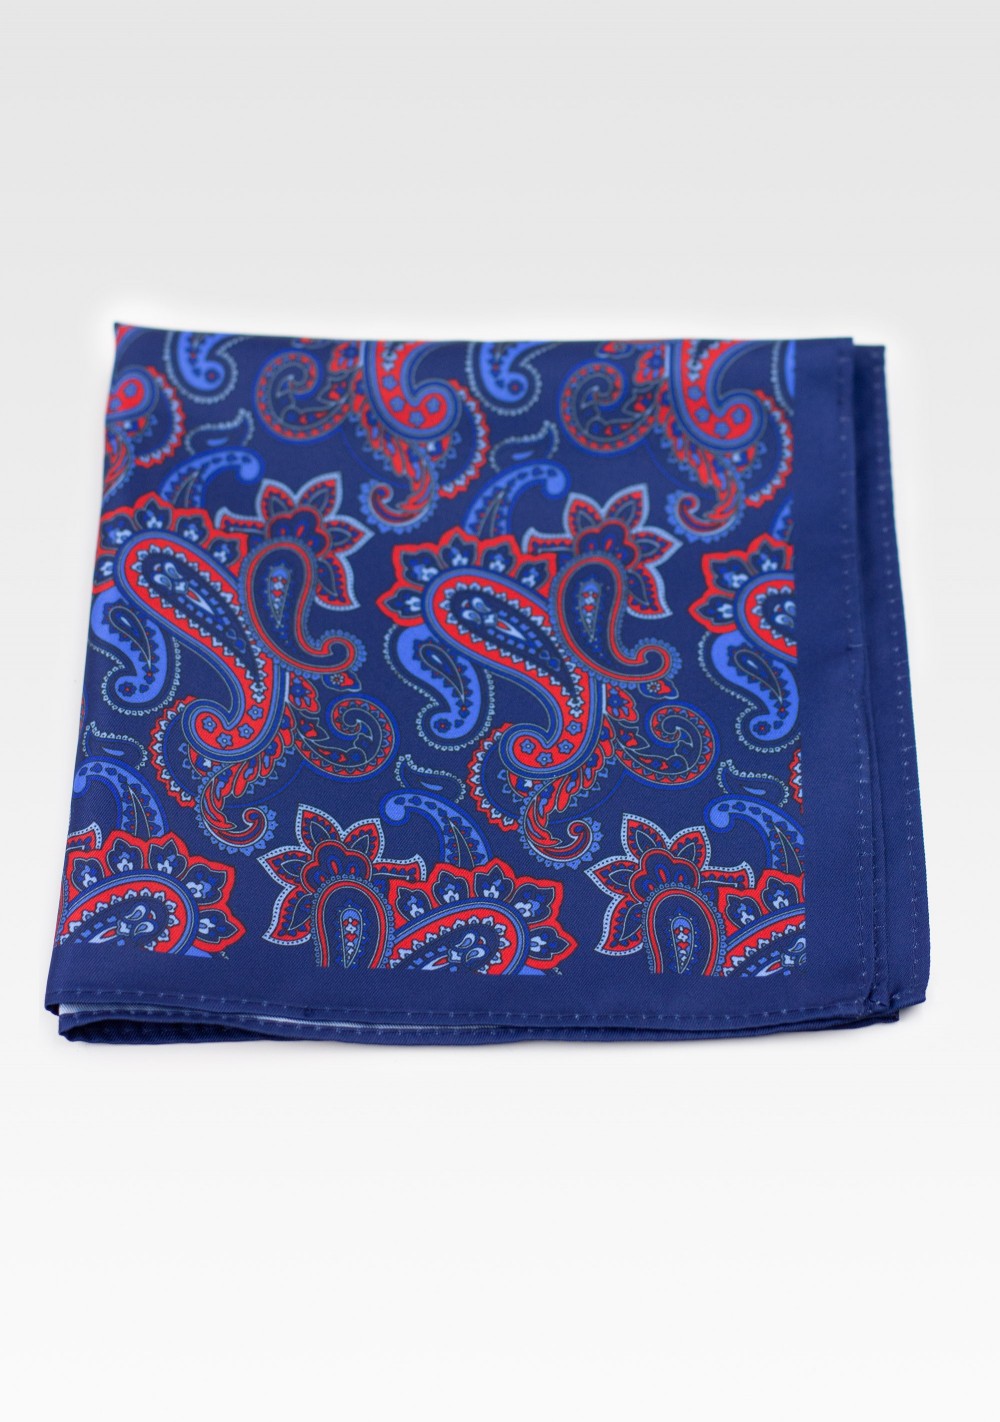 Dress Pocket Square in Blue with Red Paisley